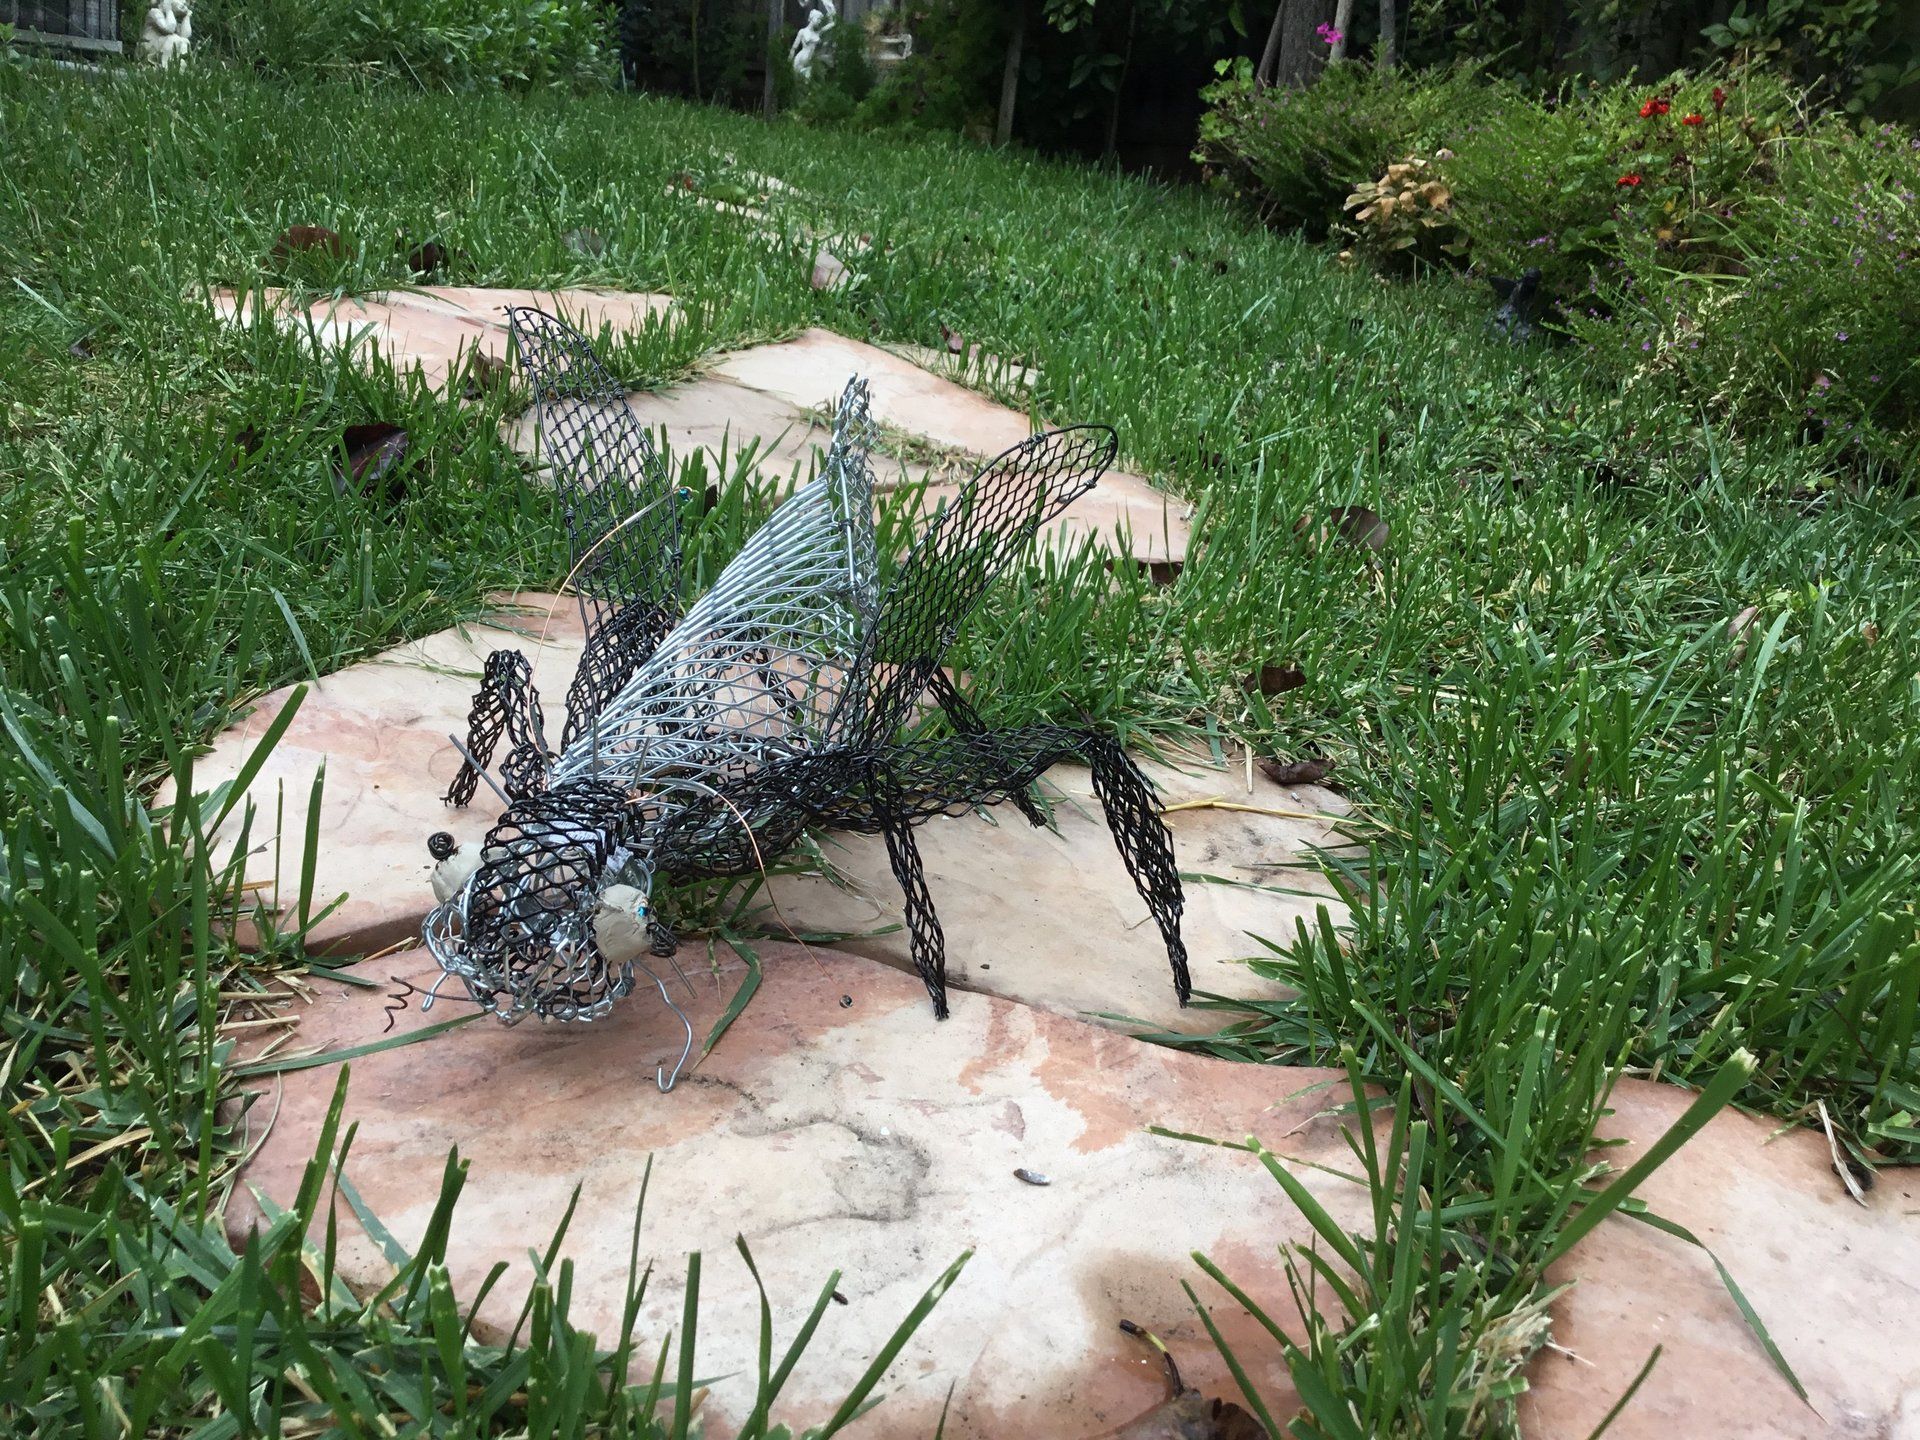 insect, chicken wire, sculpture